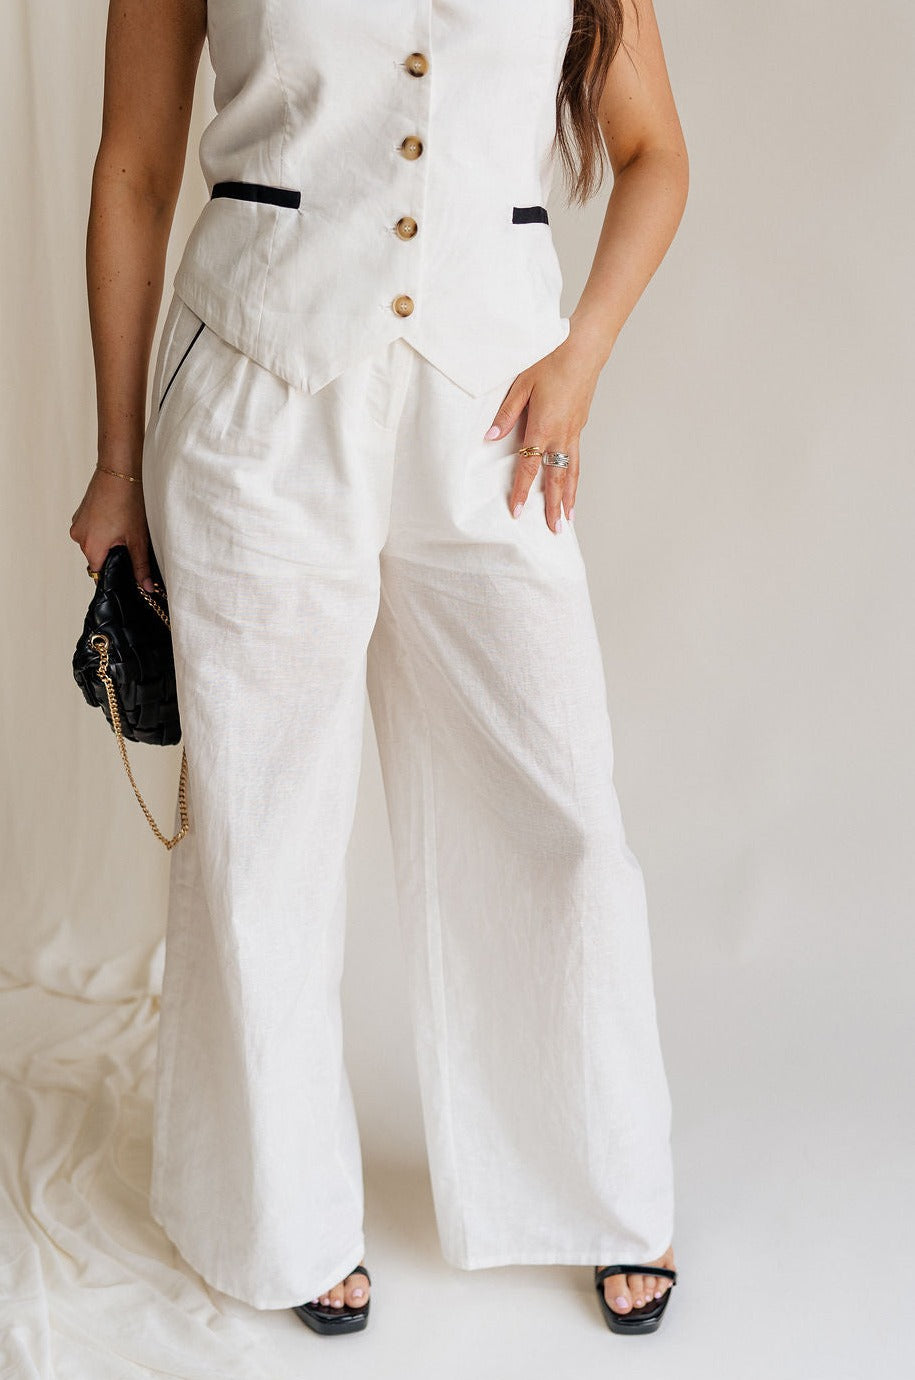 fronnt view of female model wearing the Amelia Off White & Black Wide Leg Pants which features Off White Linen Fabric, Black Trim Details, Front Pockets, Wide Pant Legs, Front Zipper with Tortoise Button Closure and Belt Loops